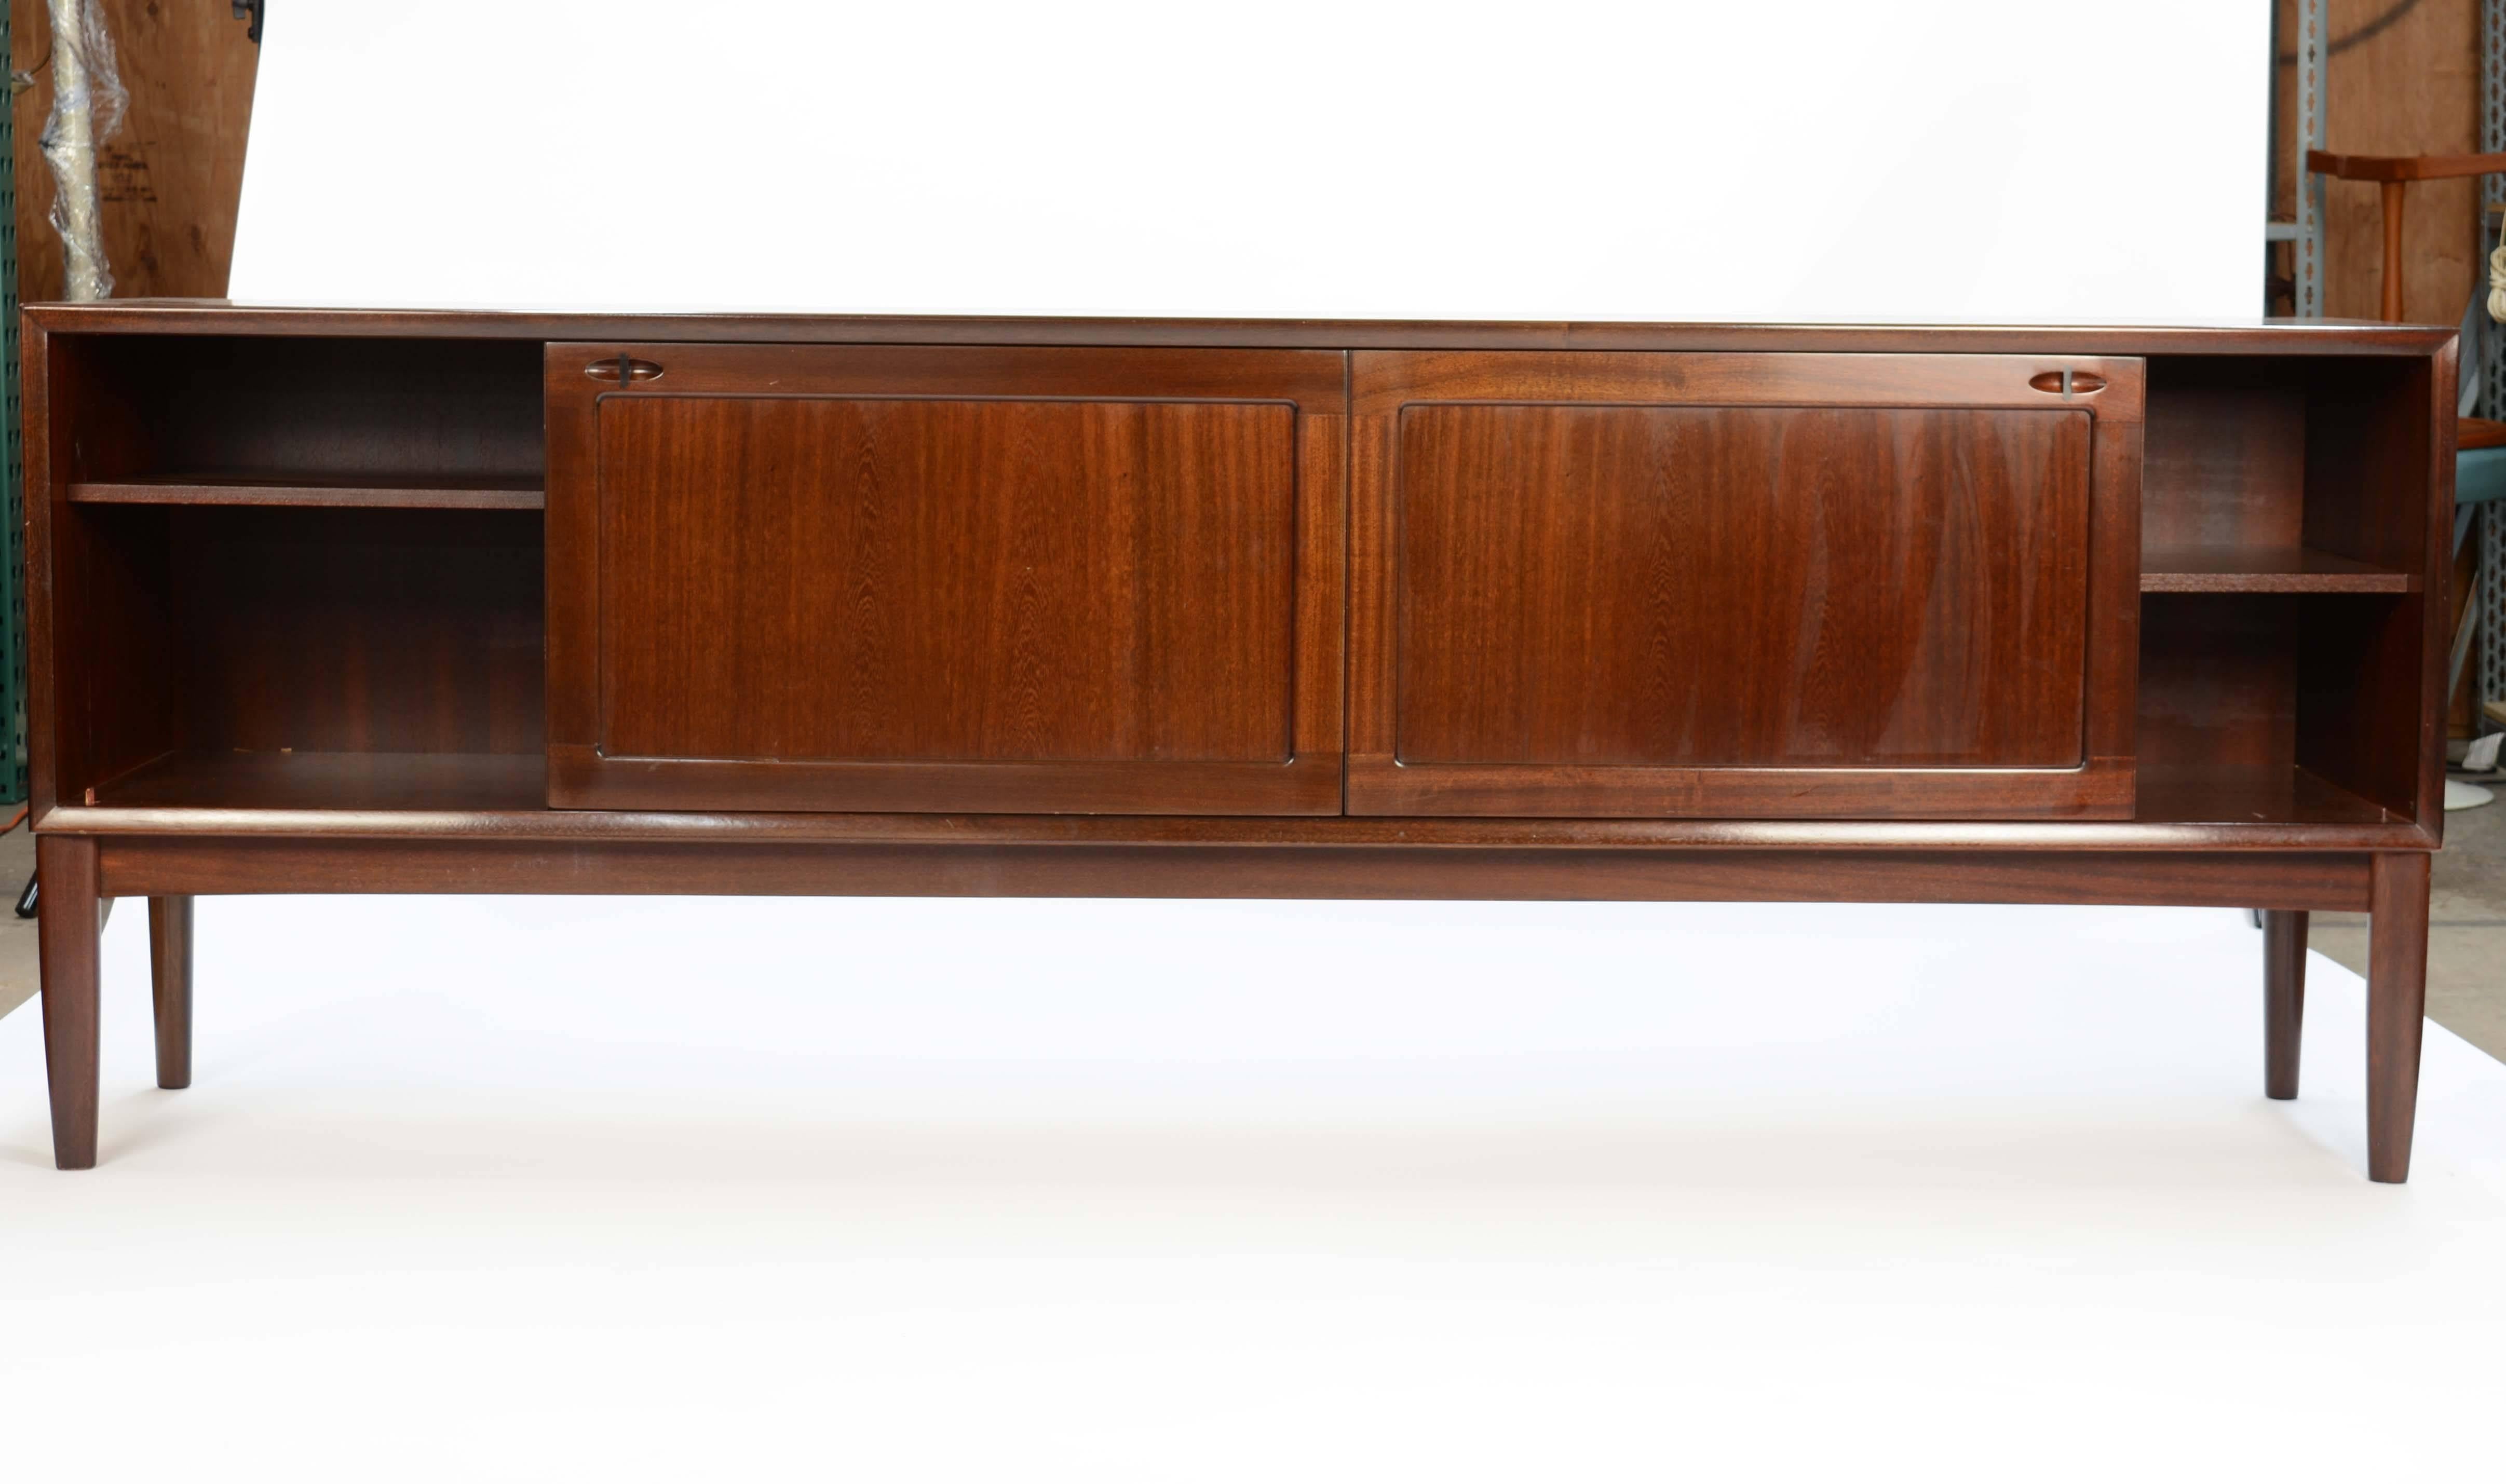 High quality mahogany sideboard. Designed by Henry W.Klein. Front with four drawers and two sliding doors. Behind sliding doors with shelves. Produced by Bramin Denmark. Freestanding.